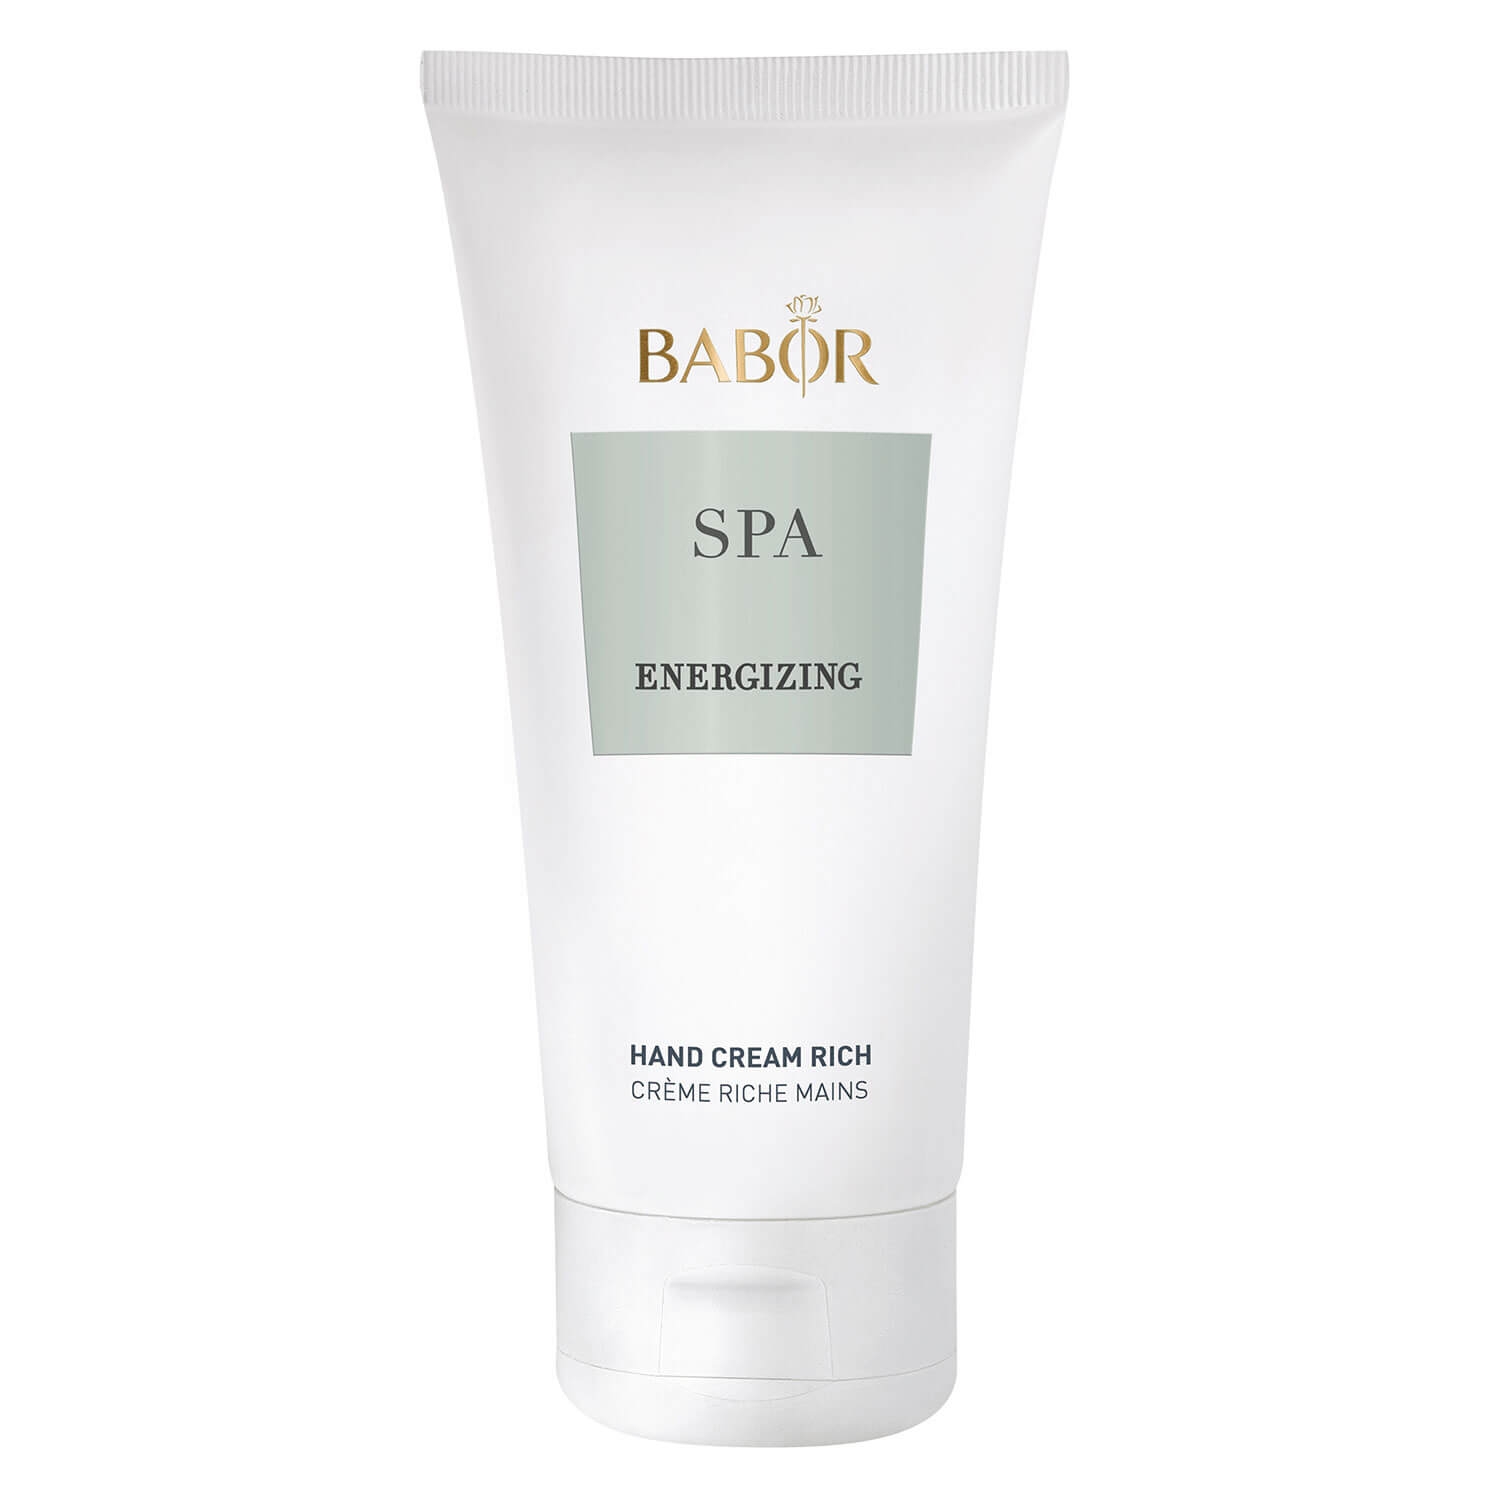 Product image from BABOR SPA - Energizing Energizing Hand Cream Rich